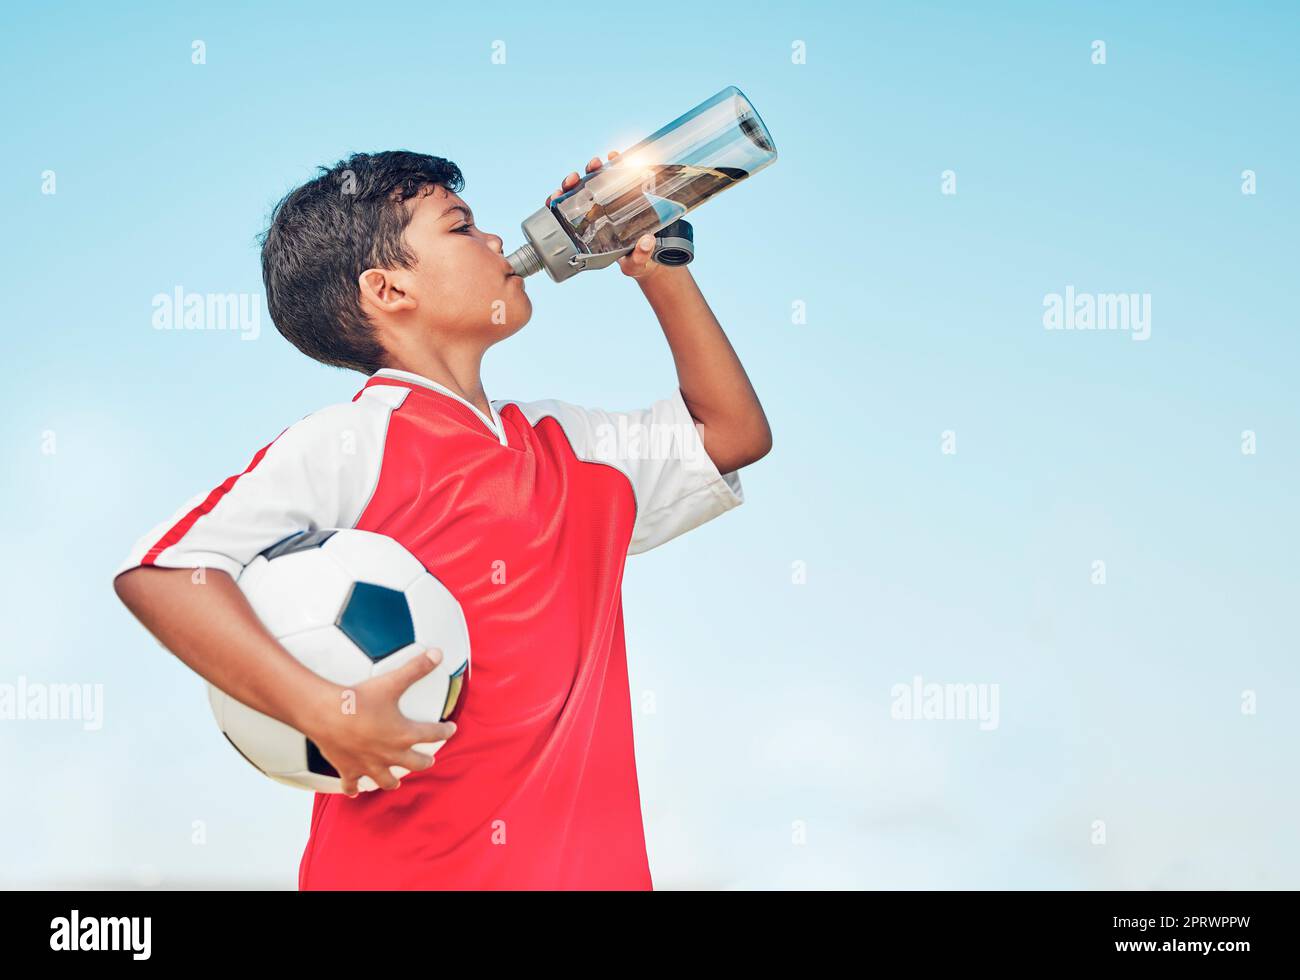 https://c8.alamy.com/comp/2PRWPPW/training-sports-and-football-with-child-drinking-water-for-fitness-health-or-endurance-exercise-wellness-summer-and-workout-with-young-soccer-play-2PRWPPW.jpg